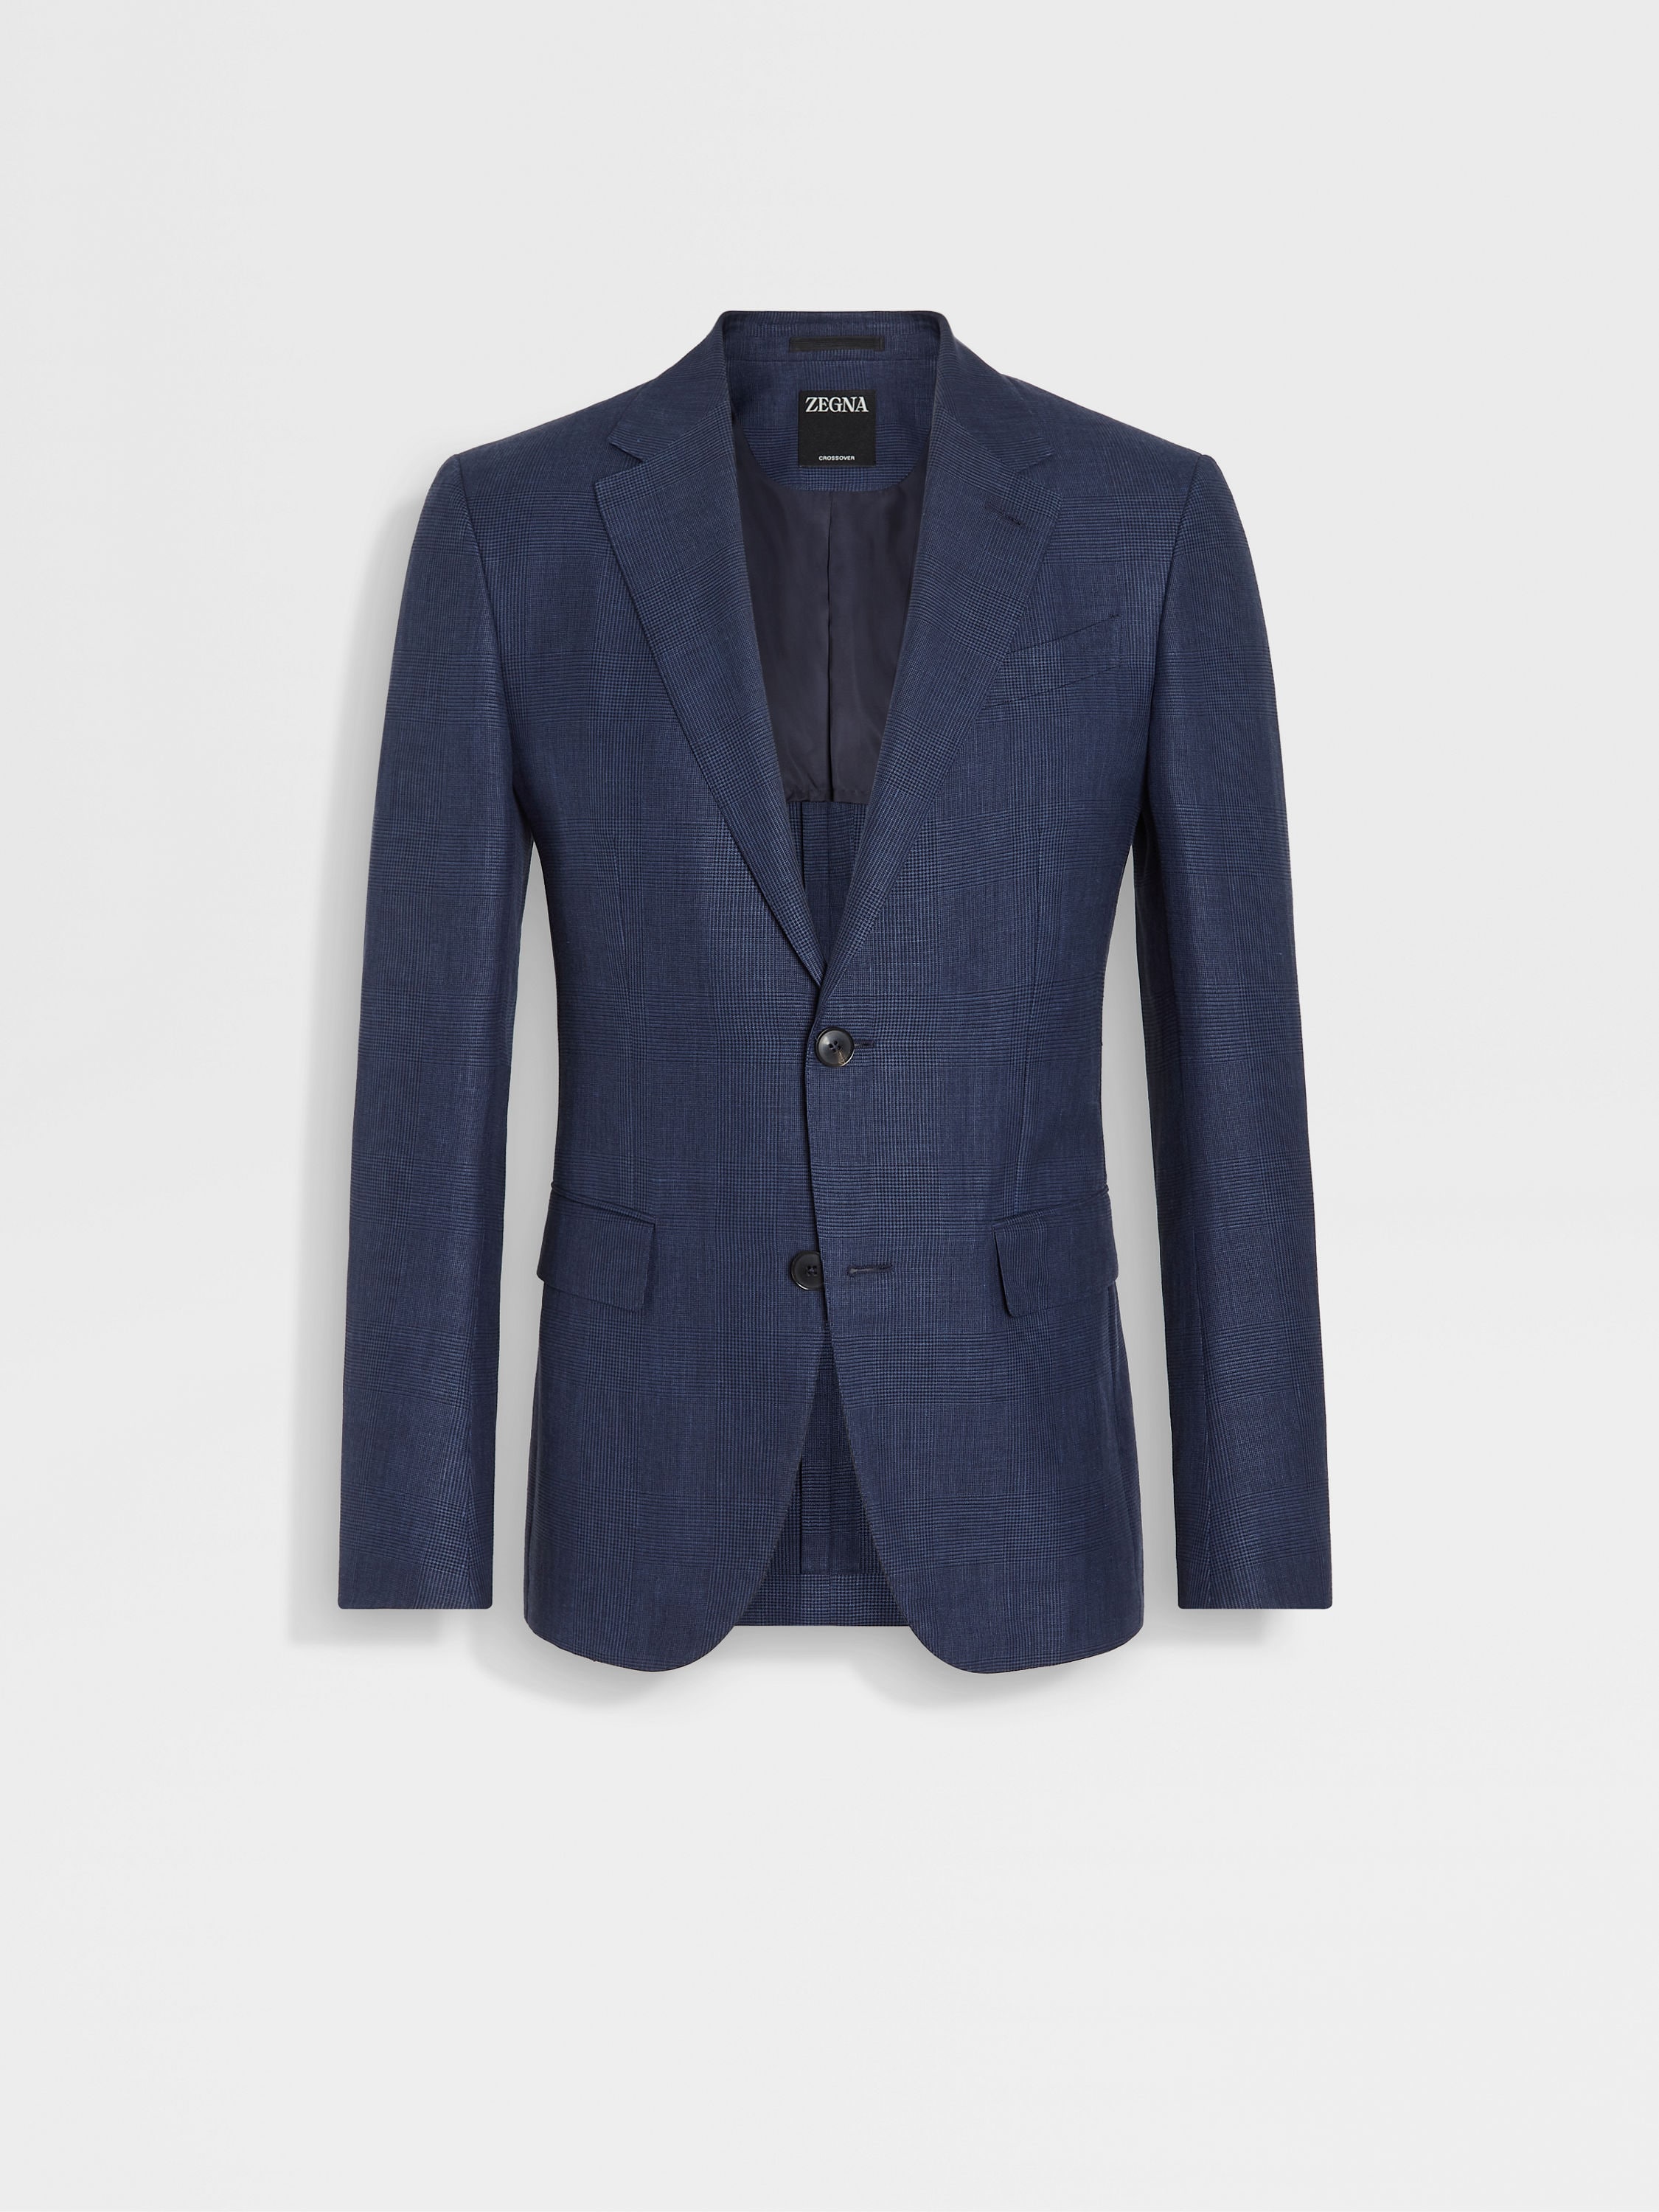 Blue and Navy Blue Crossover Wool Blend Jacket